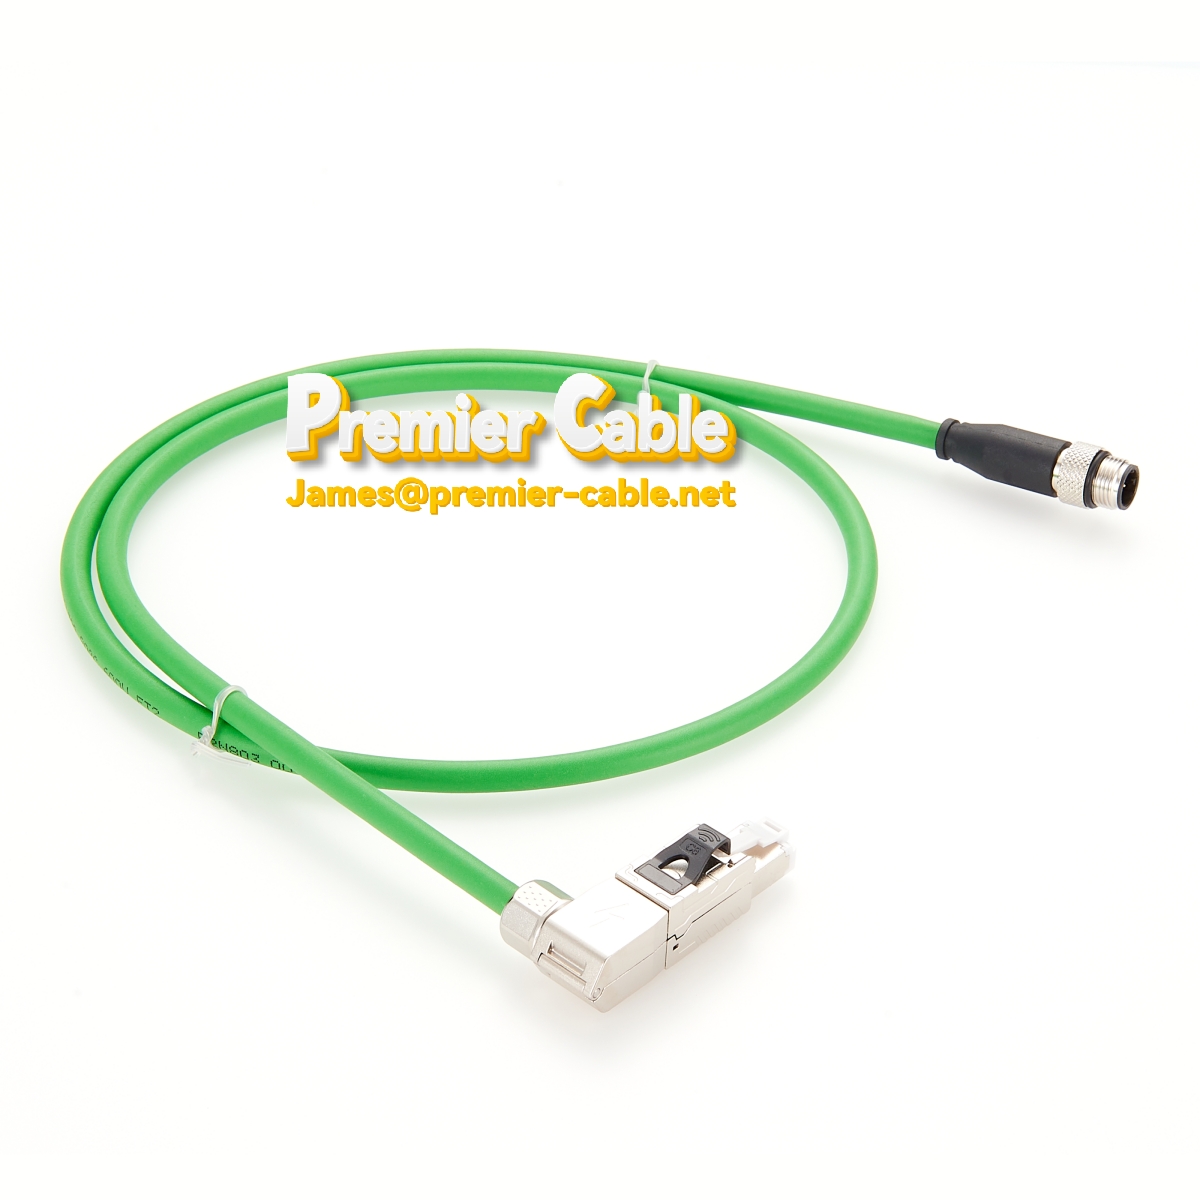 M12 D Code 4 pin to RJ45 Right Angled Ethernet Cable 